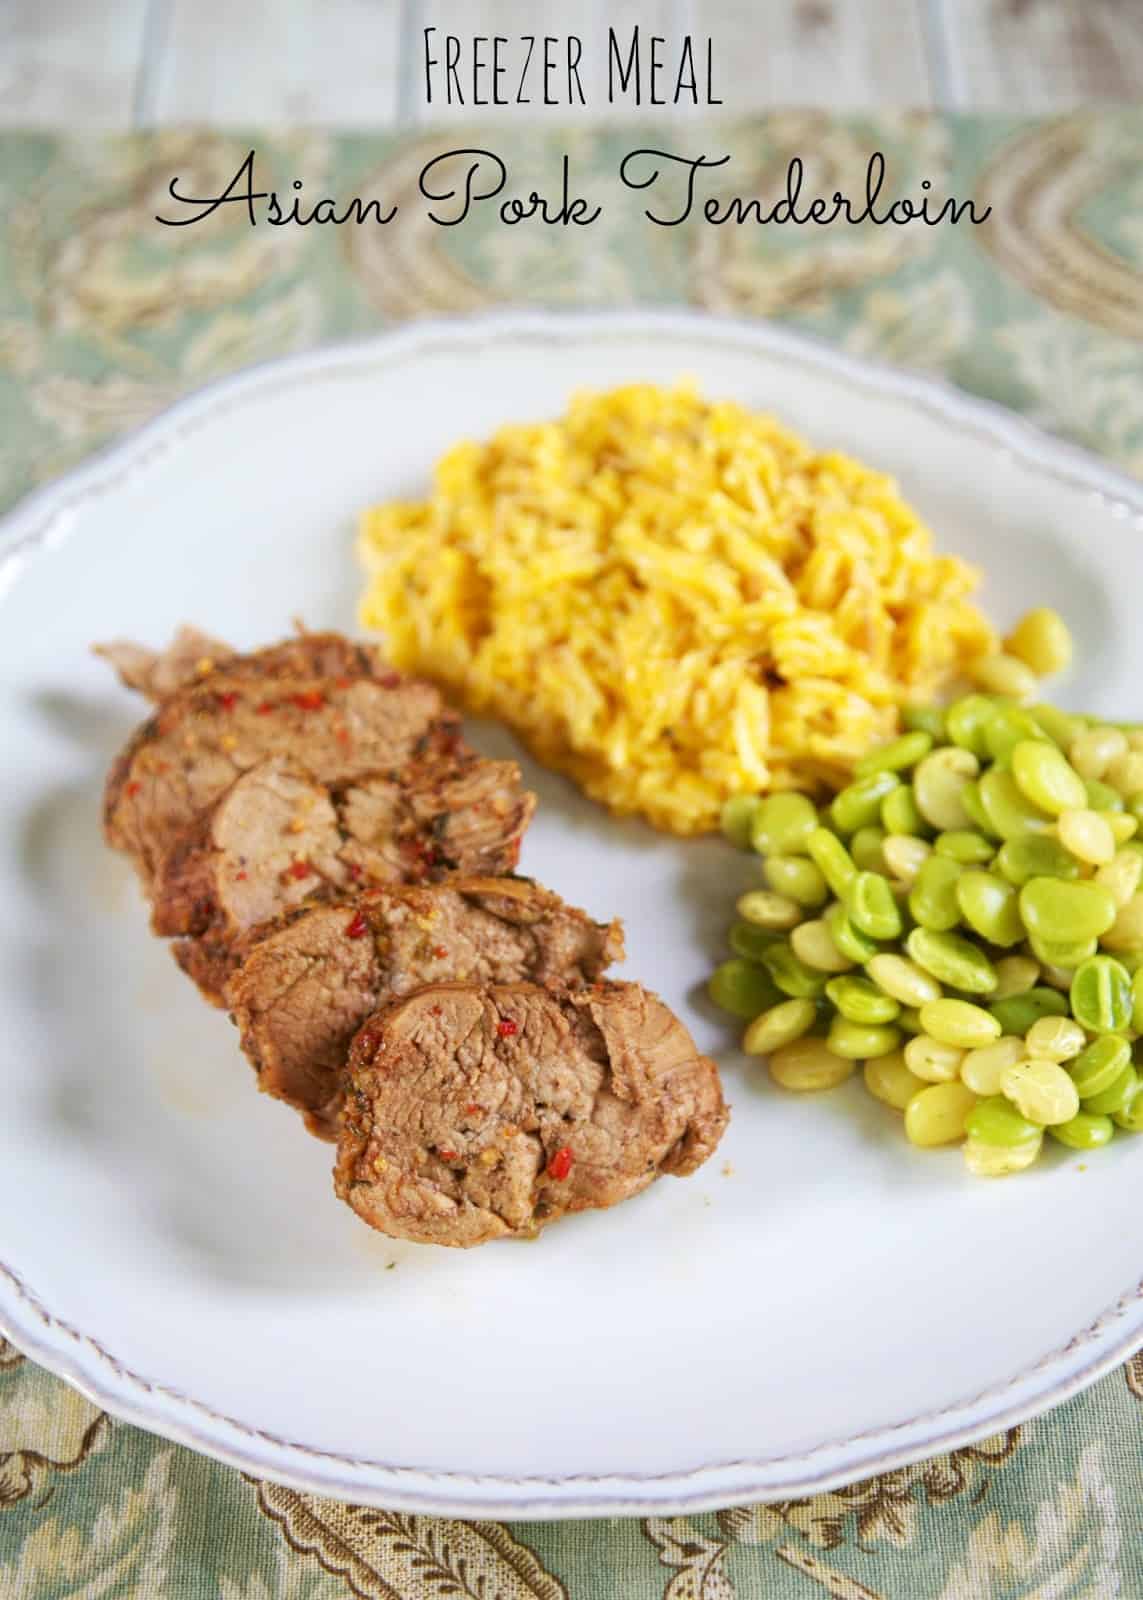 {Freezer Meal} Asian Pork Tenderloin - pork tenderloin slow cooked in Asian seasoning, dry mustard, pomegranate balsamic vinegar, chicken broth and honey. Can put in the slow cooker frozen!!! This was a HUGE hit in our house!! Everyone cleaned their plates and asked for seconds! This is a winner!! #freezermeal #porktenderloin #slowcooker